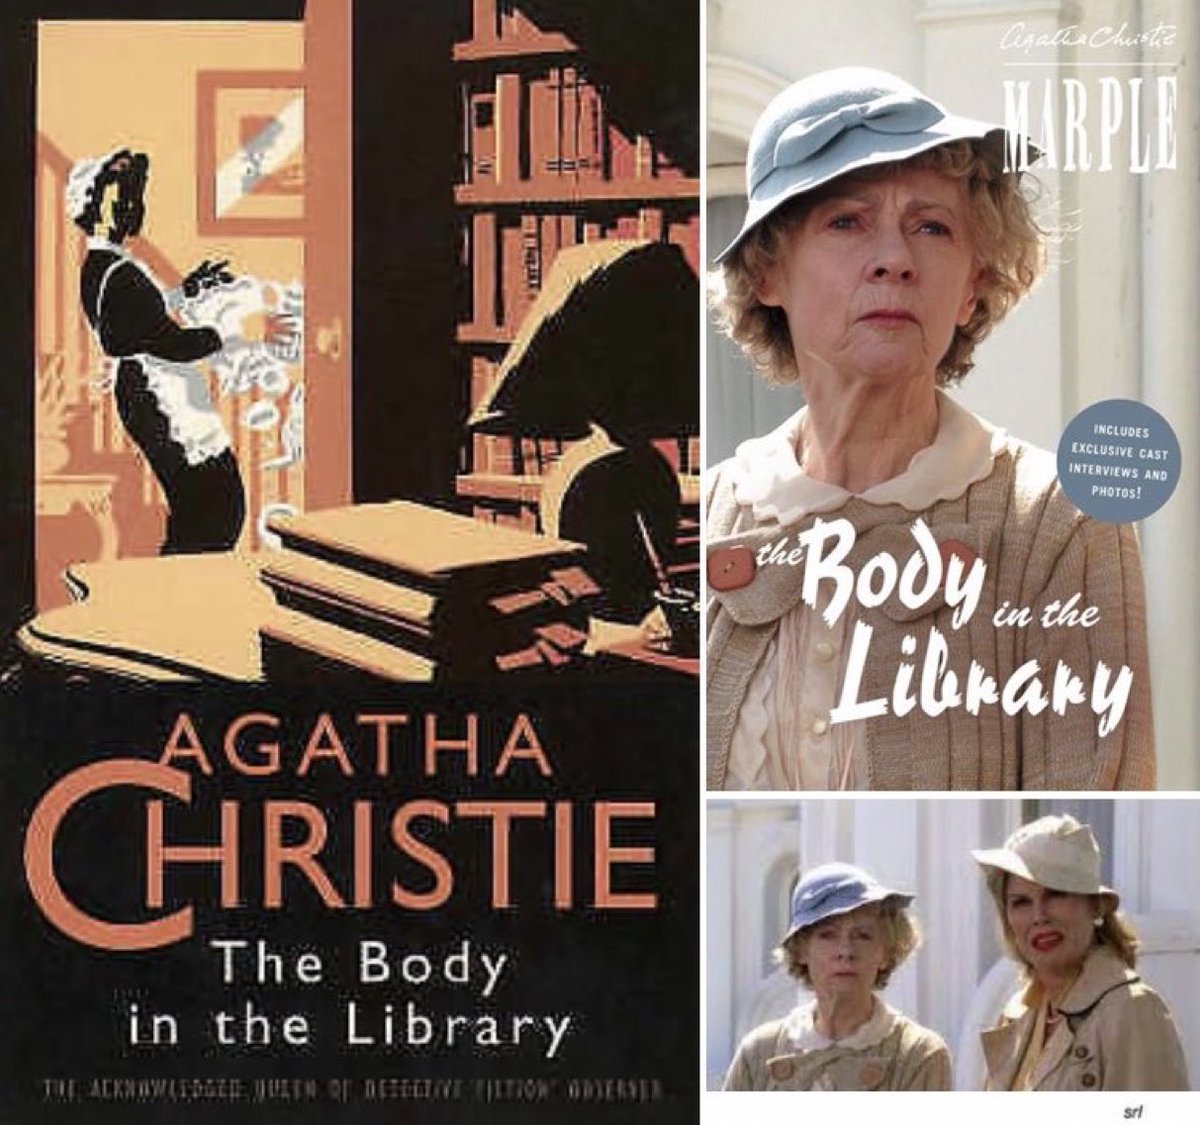 3:45pm TODAY on #ITV3

From 2004, s1 Ep 1 of 📺#AgathaChristiesMarple - “The Body in the Library” directed by #AndyWilson from a screenplay by #KevinElyot 

Based on #AgathaChristie's 1942 novel📖 

🌟#GeraldineMcEwan #IanRichardson #TaraFitzgerald #JoannaLumley #JamesFox